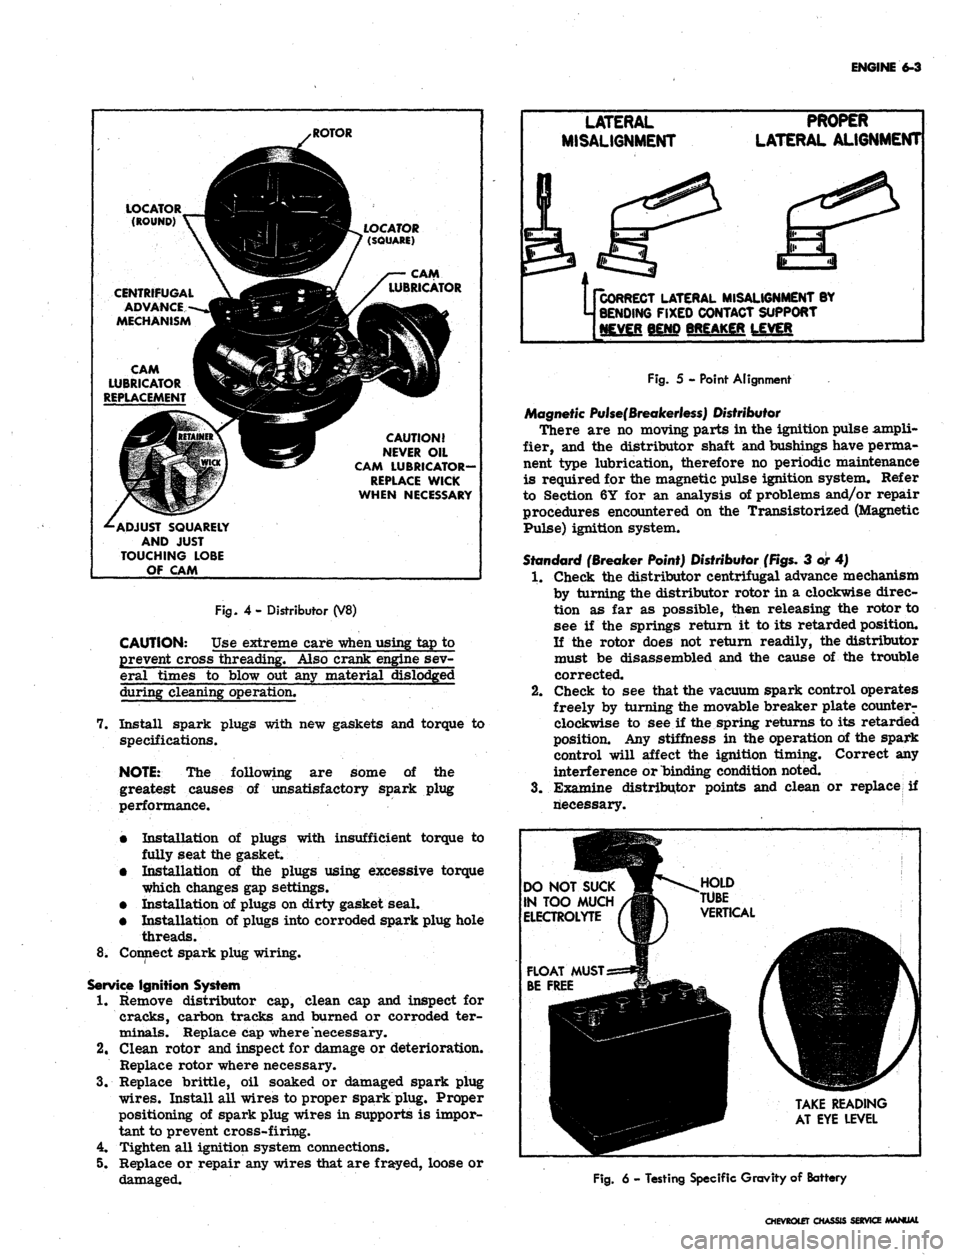 CHEVROLET CAMARO 1967 1.G Chassis Repair Manual 
ENGINE
 6-3

(ROUND) Y~~fll^H

CENTRIFUGAL
 A ^k

ADVANCE--jflgKpl

MECHANISM
 UB|

CAM
 KSK^2

LUBRICATOR
 VlSMi

REPLACEMENT
 ^BK

-^ADJUST
 SQUARELY

AND
 JUST

TOUCHING
 LOBE

OF
 CAM 
/ROTOR

HB